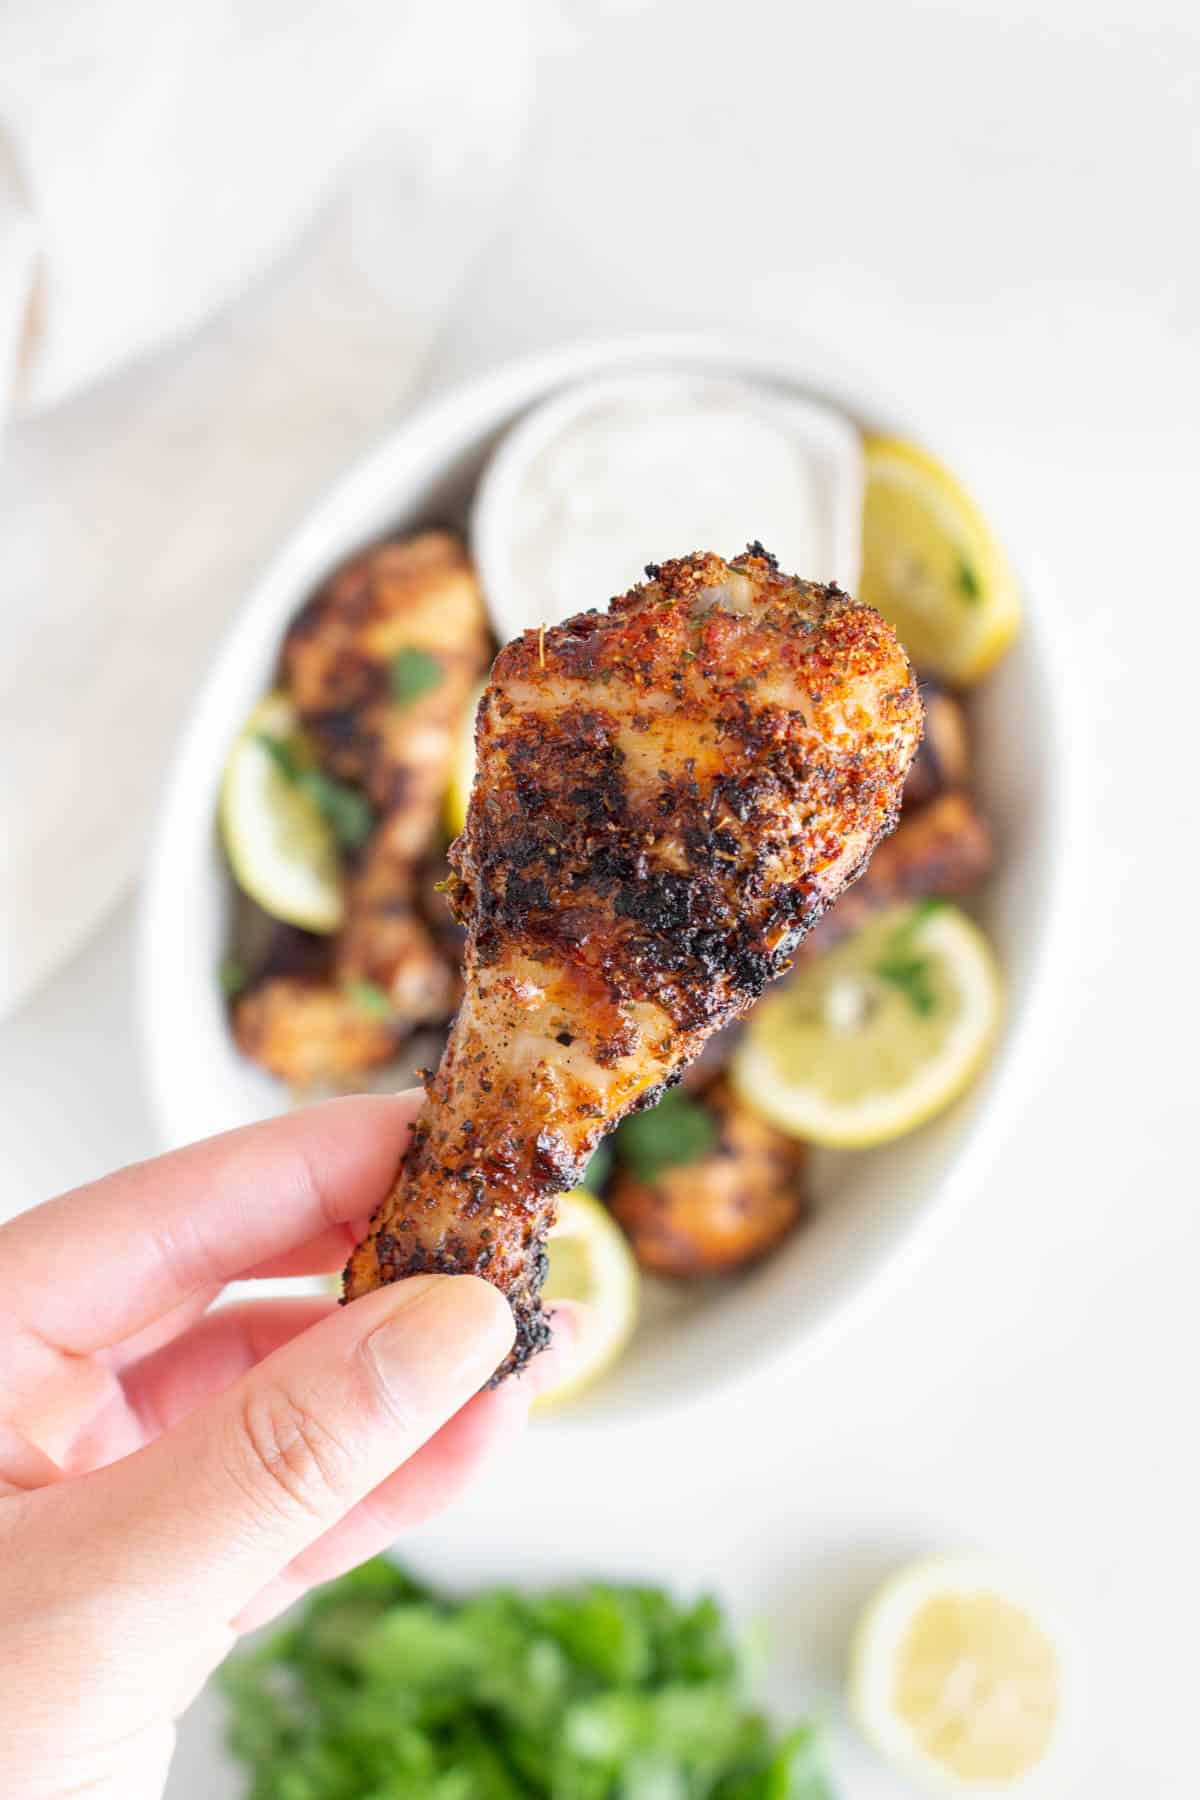 A hand holding up a grilled chicken drumstick over a platter of more drumsticks.